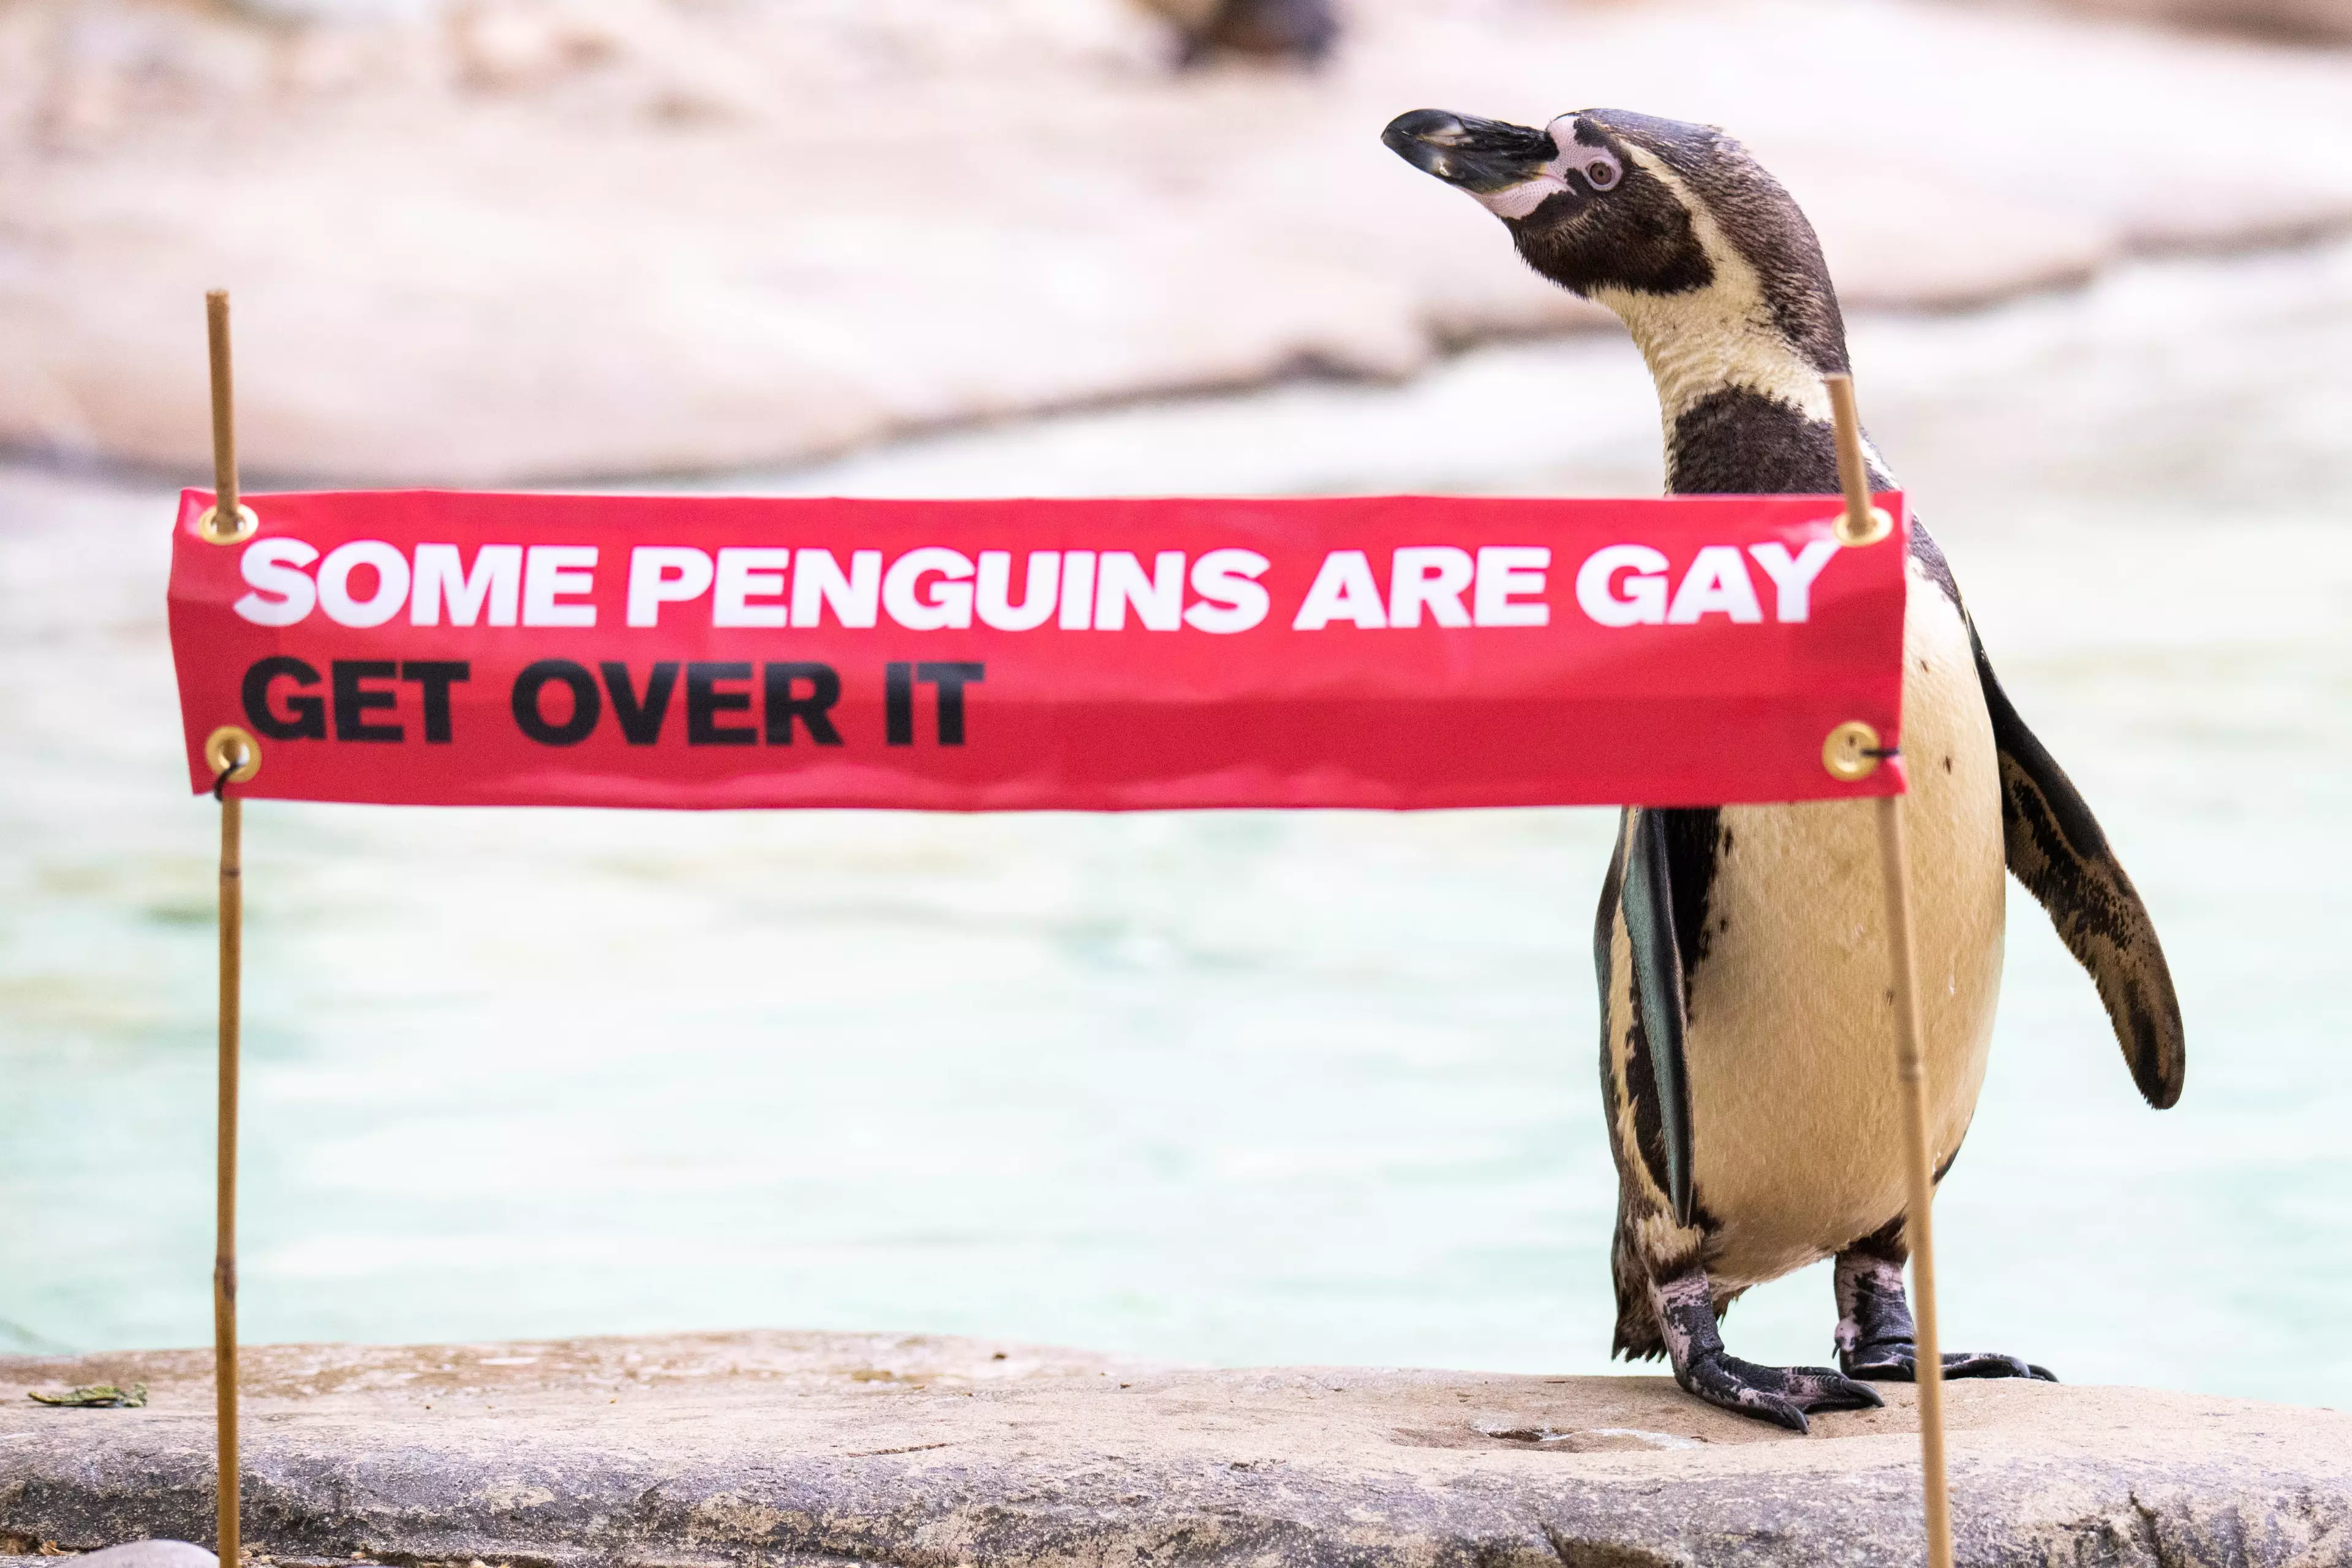 ZSL London Zoo Is Celebrating Its Gay Penguins For Pride Month